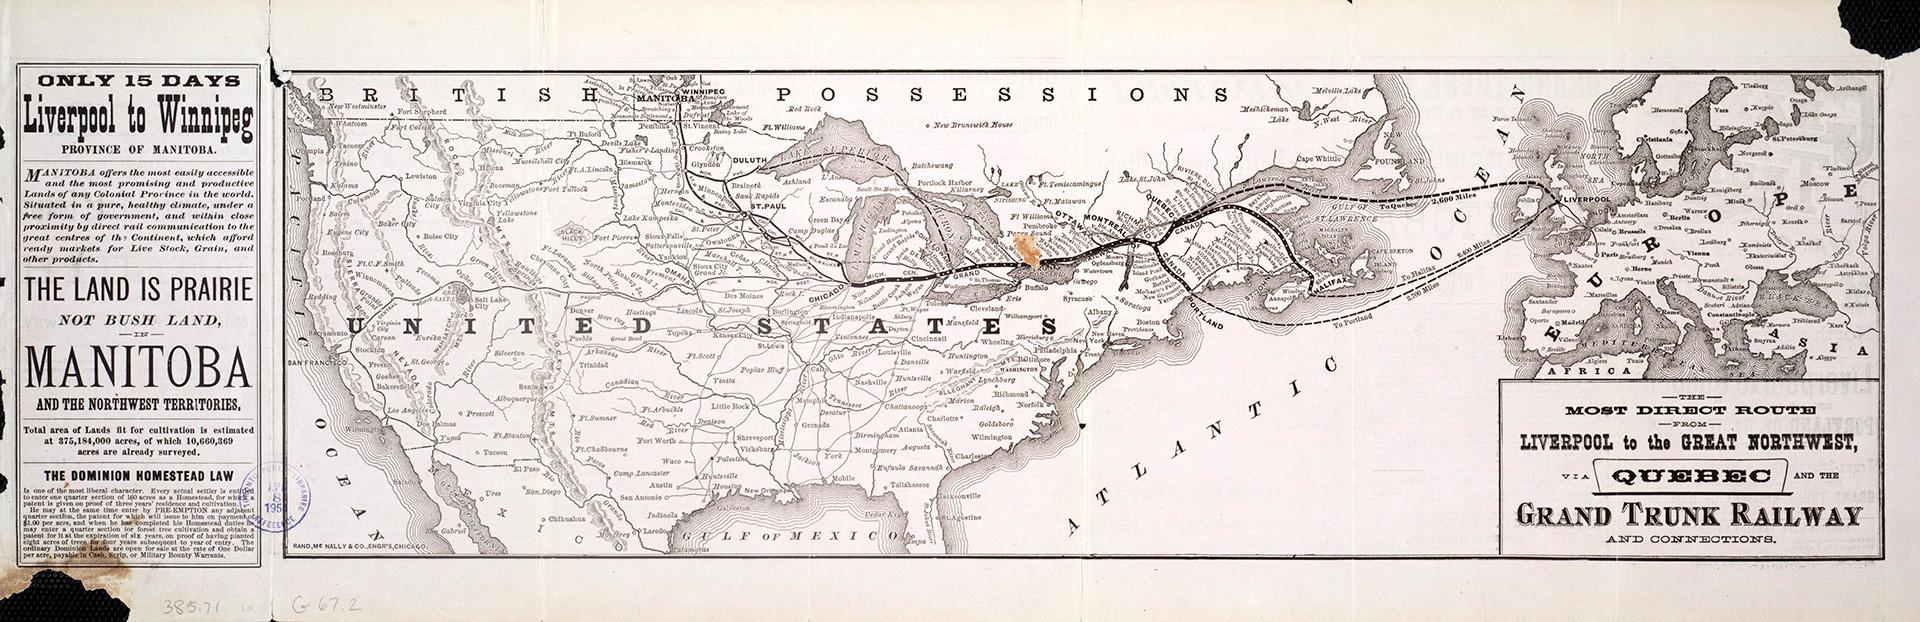 Grand Trunk Railway of Canada, to Manitoba, the Northwest Territories, and all points in Canada and the United States